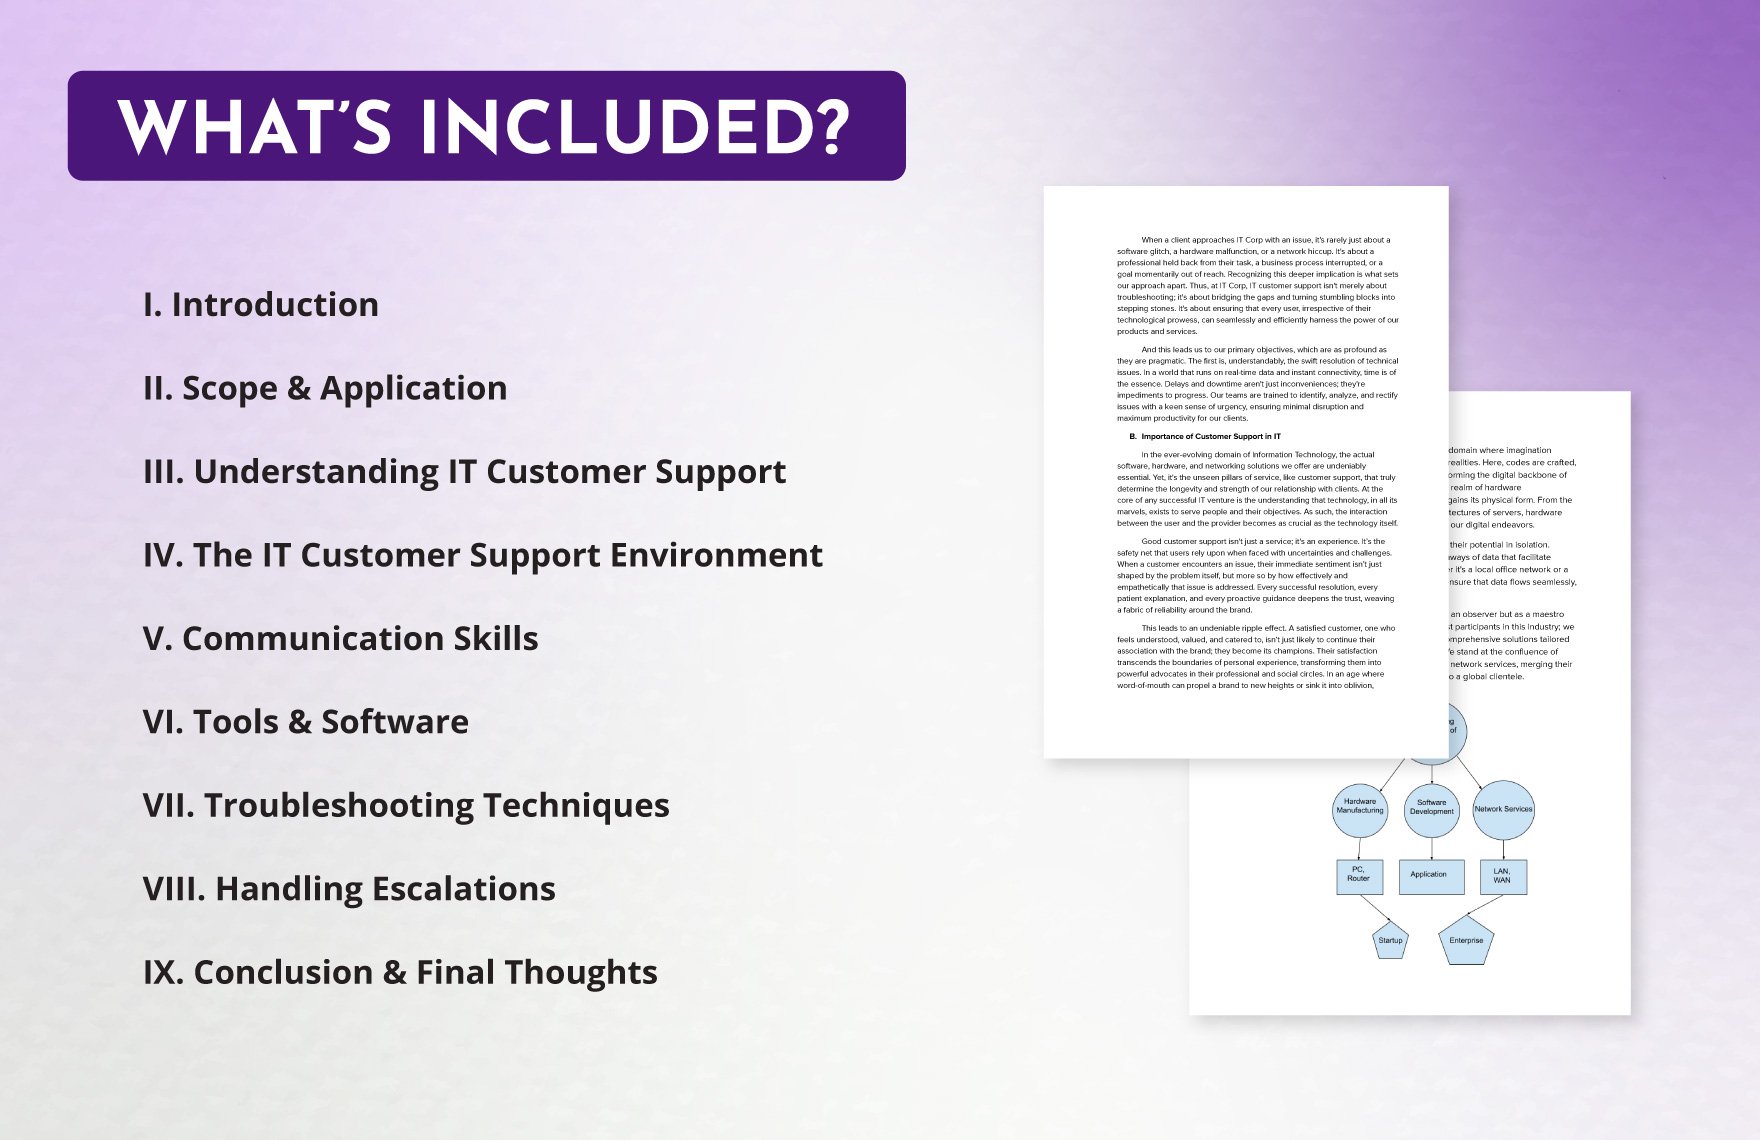 IT Customer Support Training Manual Template